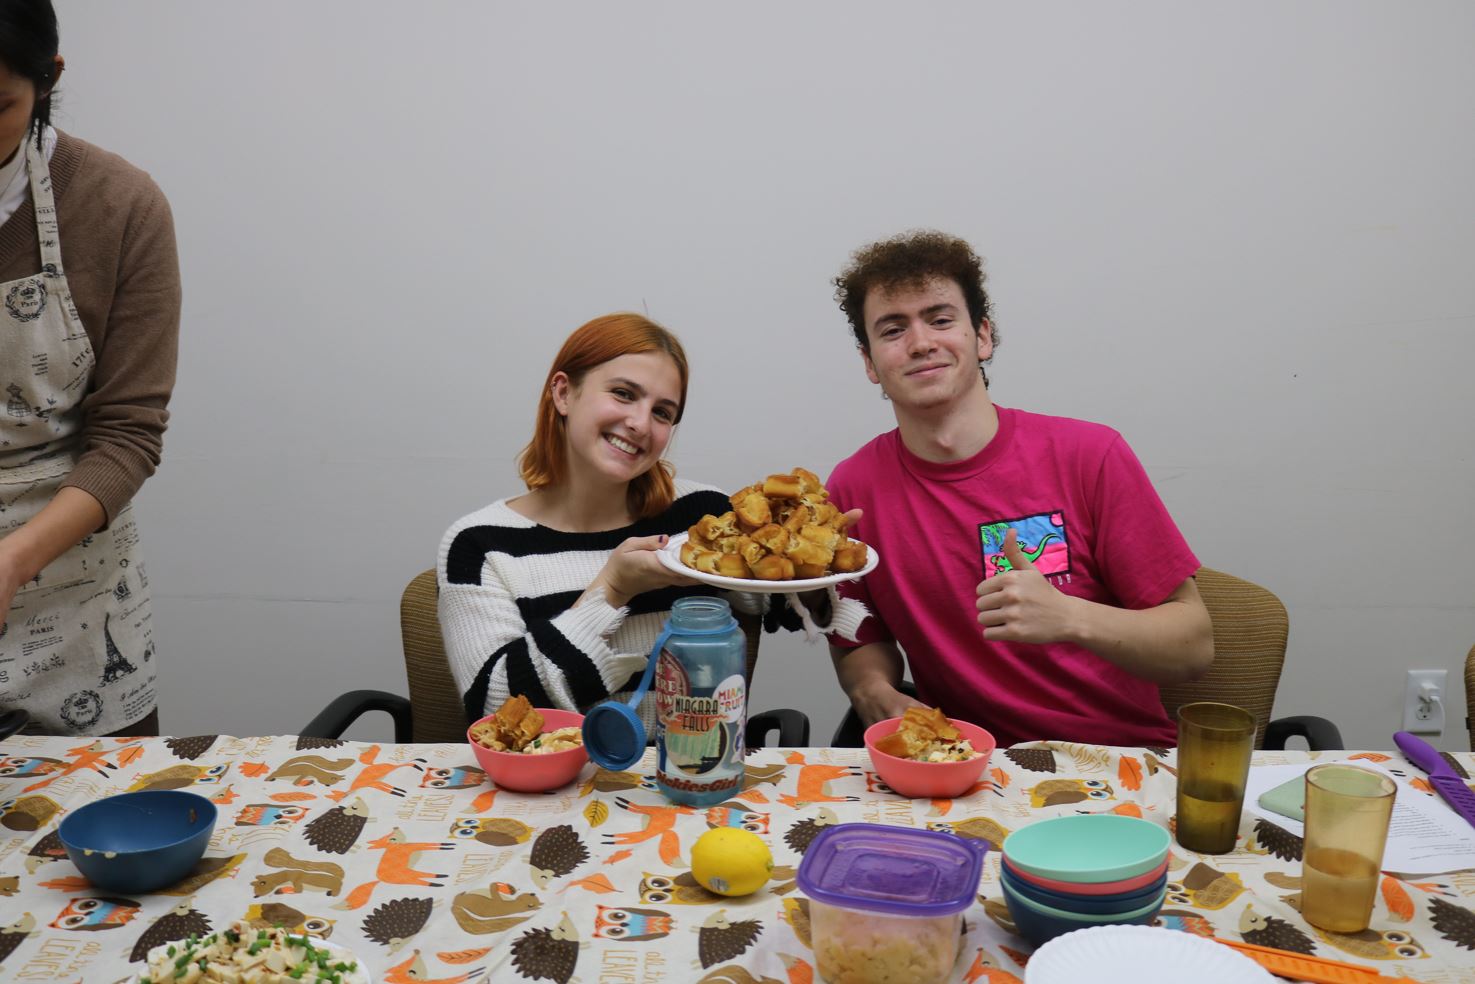 esf students hold food on a reusable plate